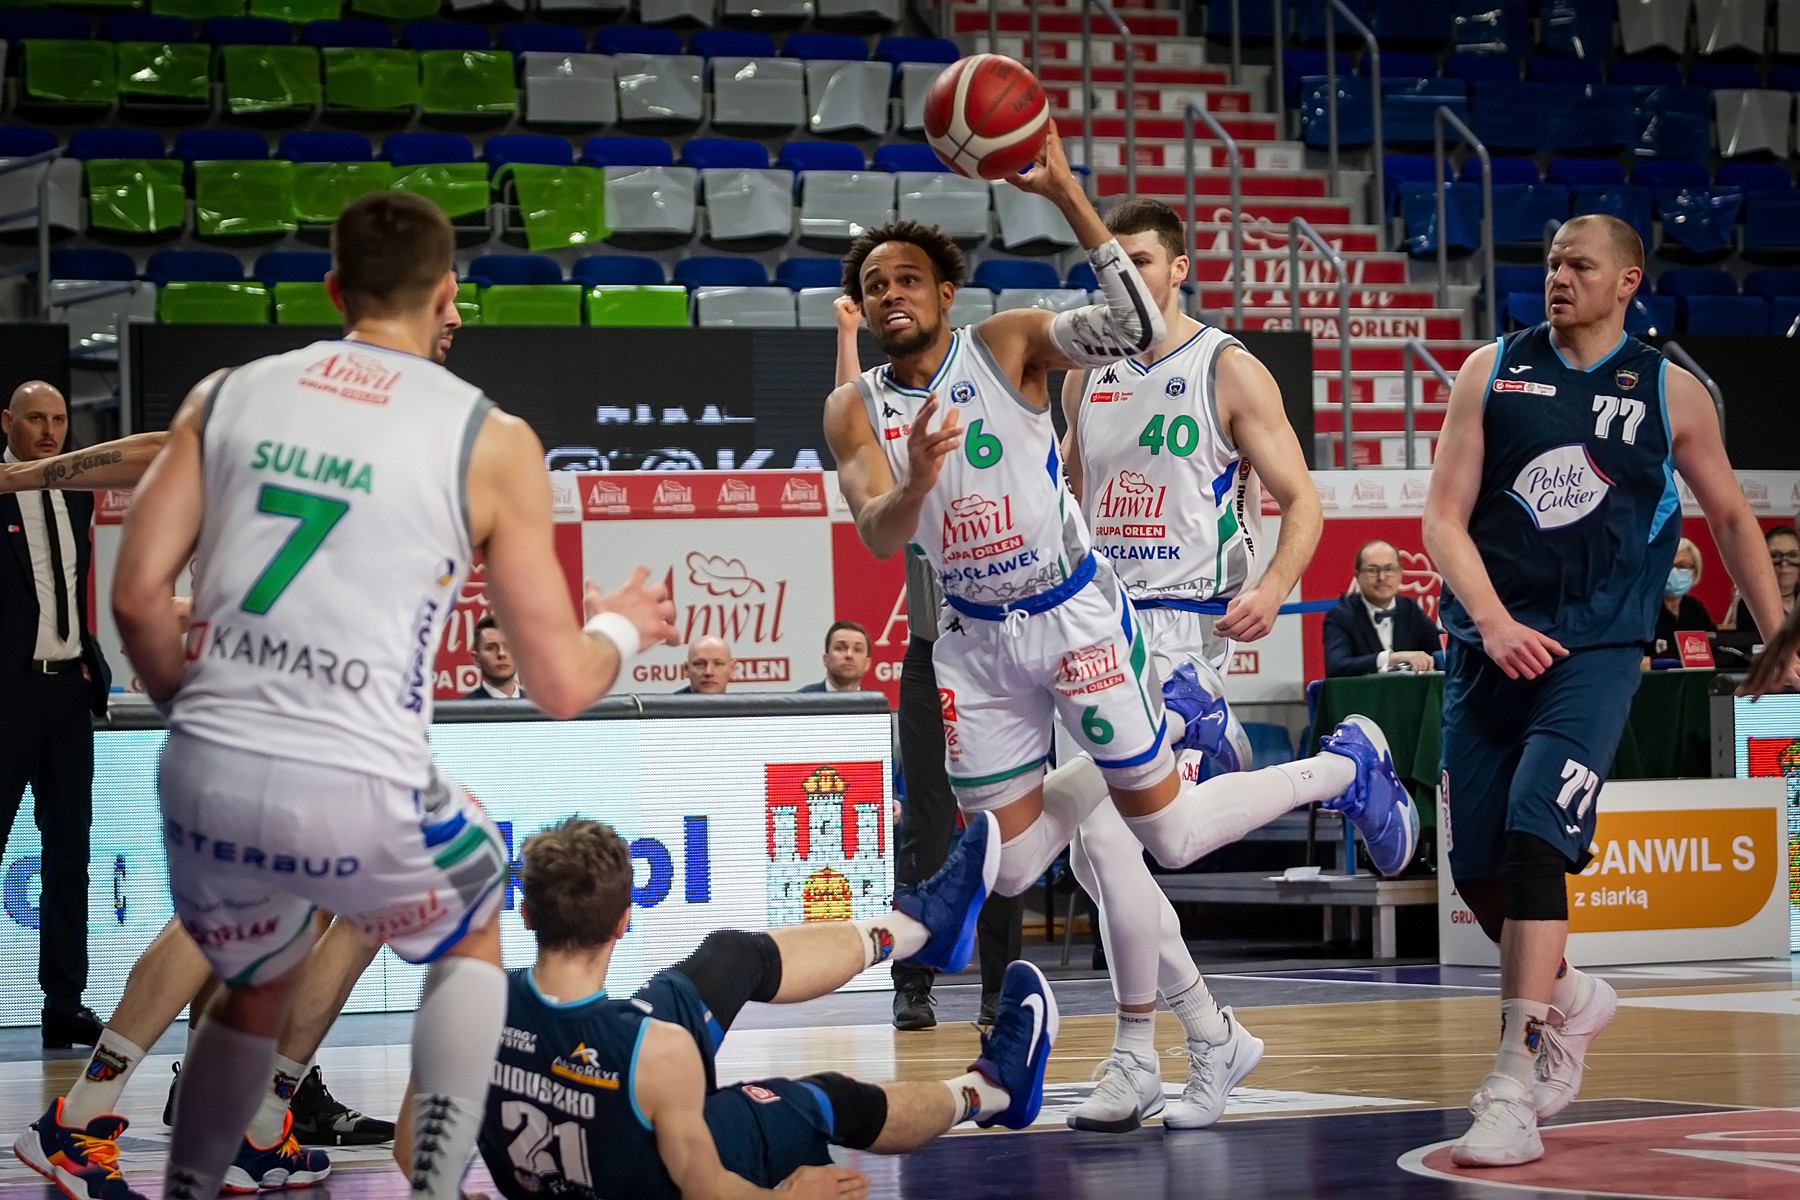 Heroic Ending And… Derby Game For Anwil! 